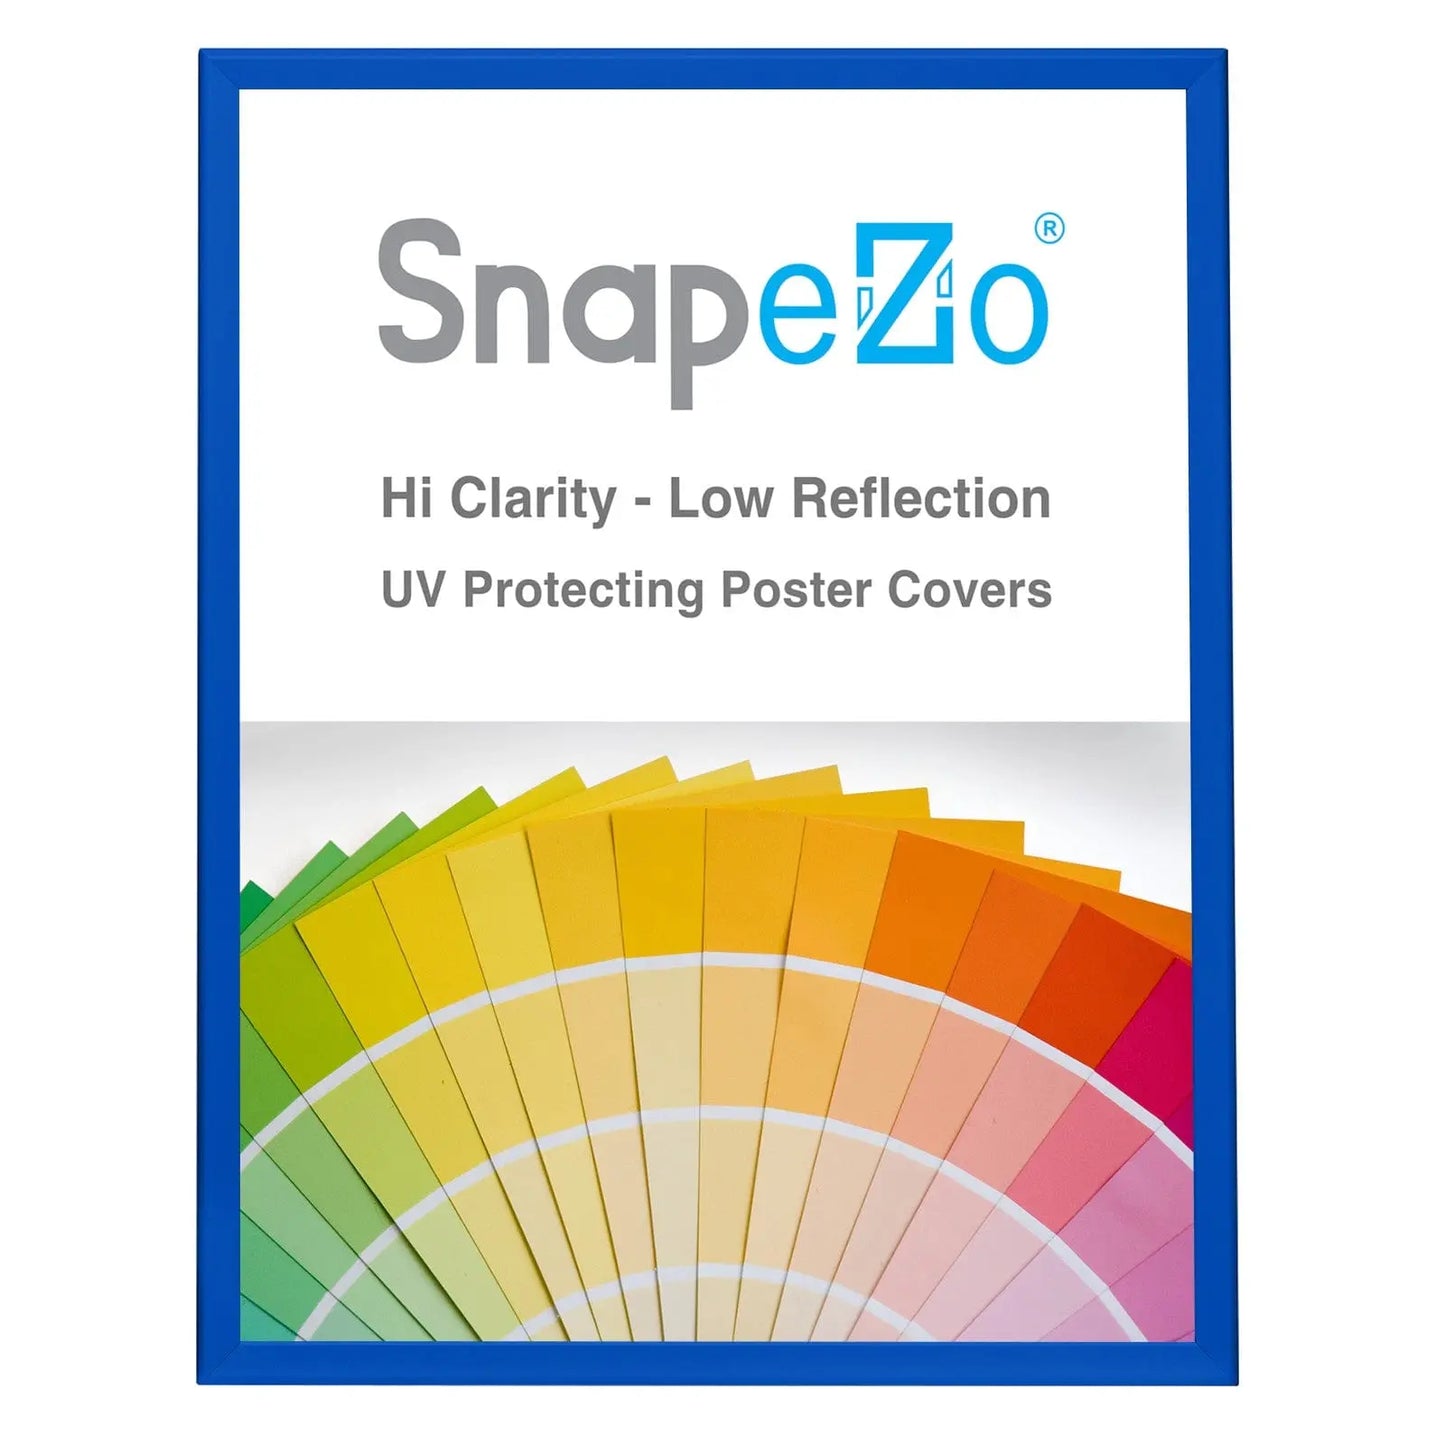 24x30 Blue SnapeZo® Snap Frame - 1.25" Profile - Snap Frames Direct